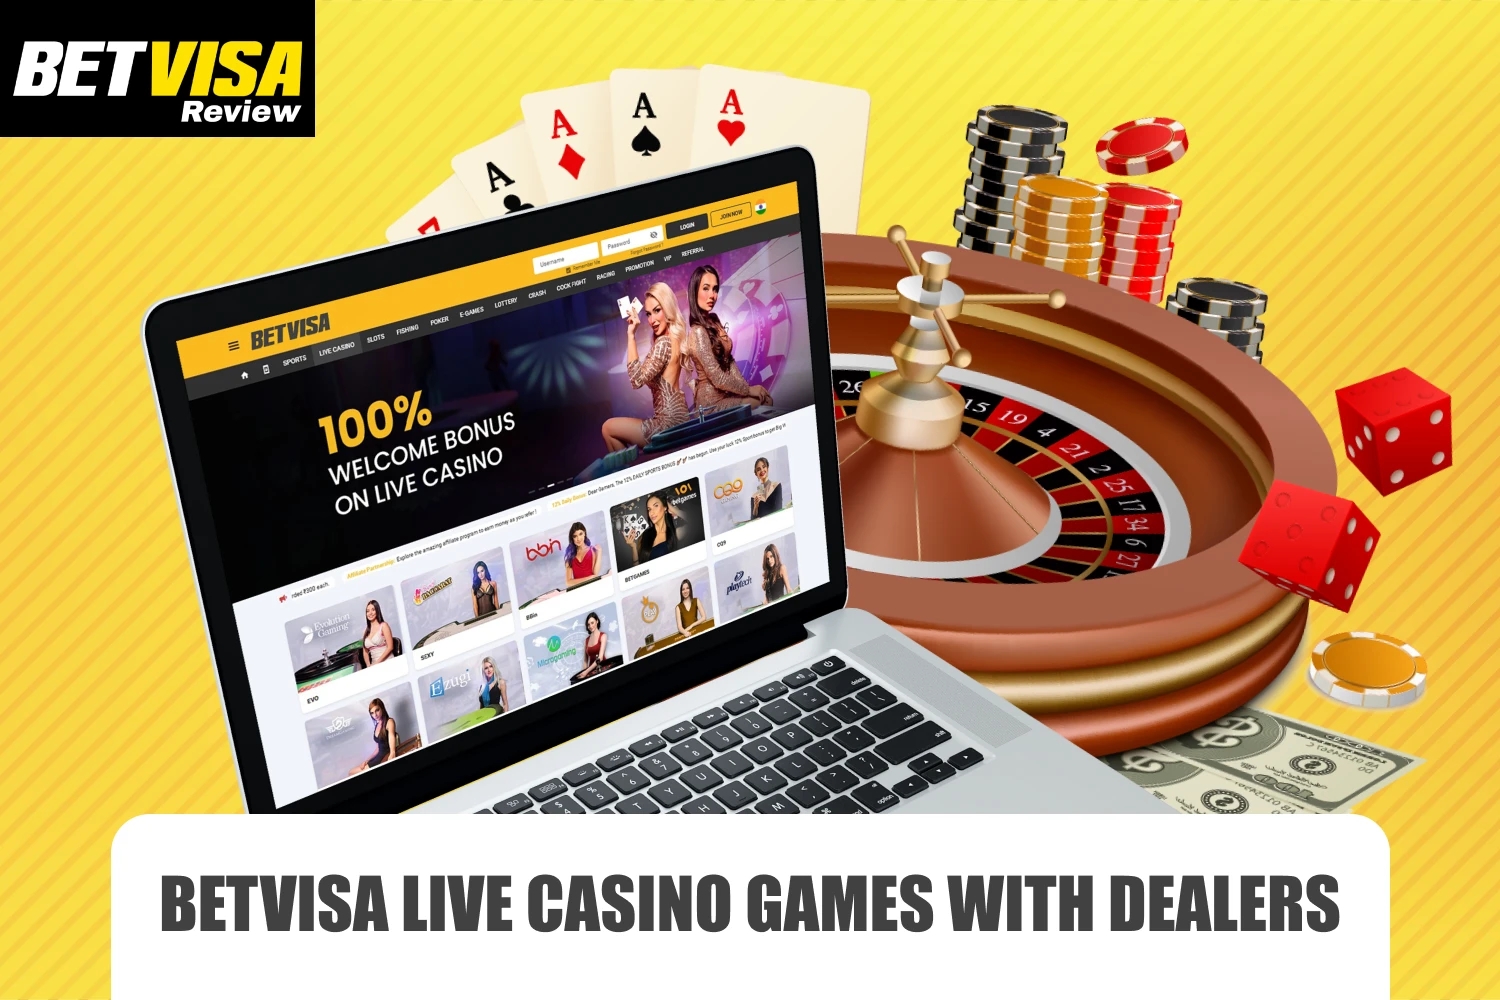 Betvisa Live Casino offers traditional and online gaming to players from India